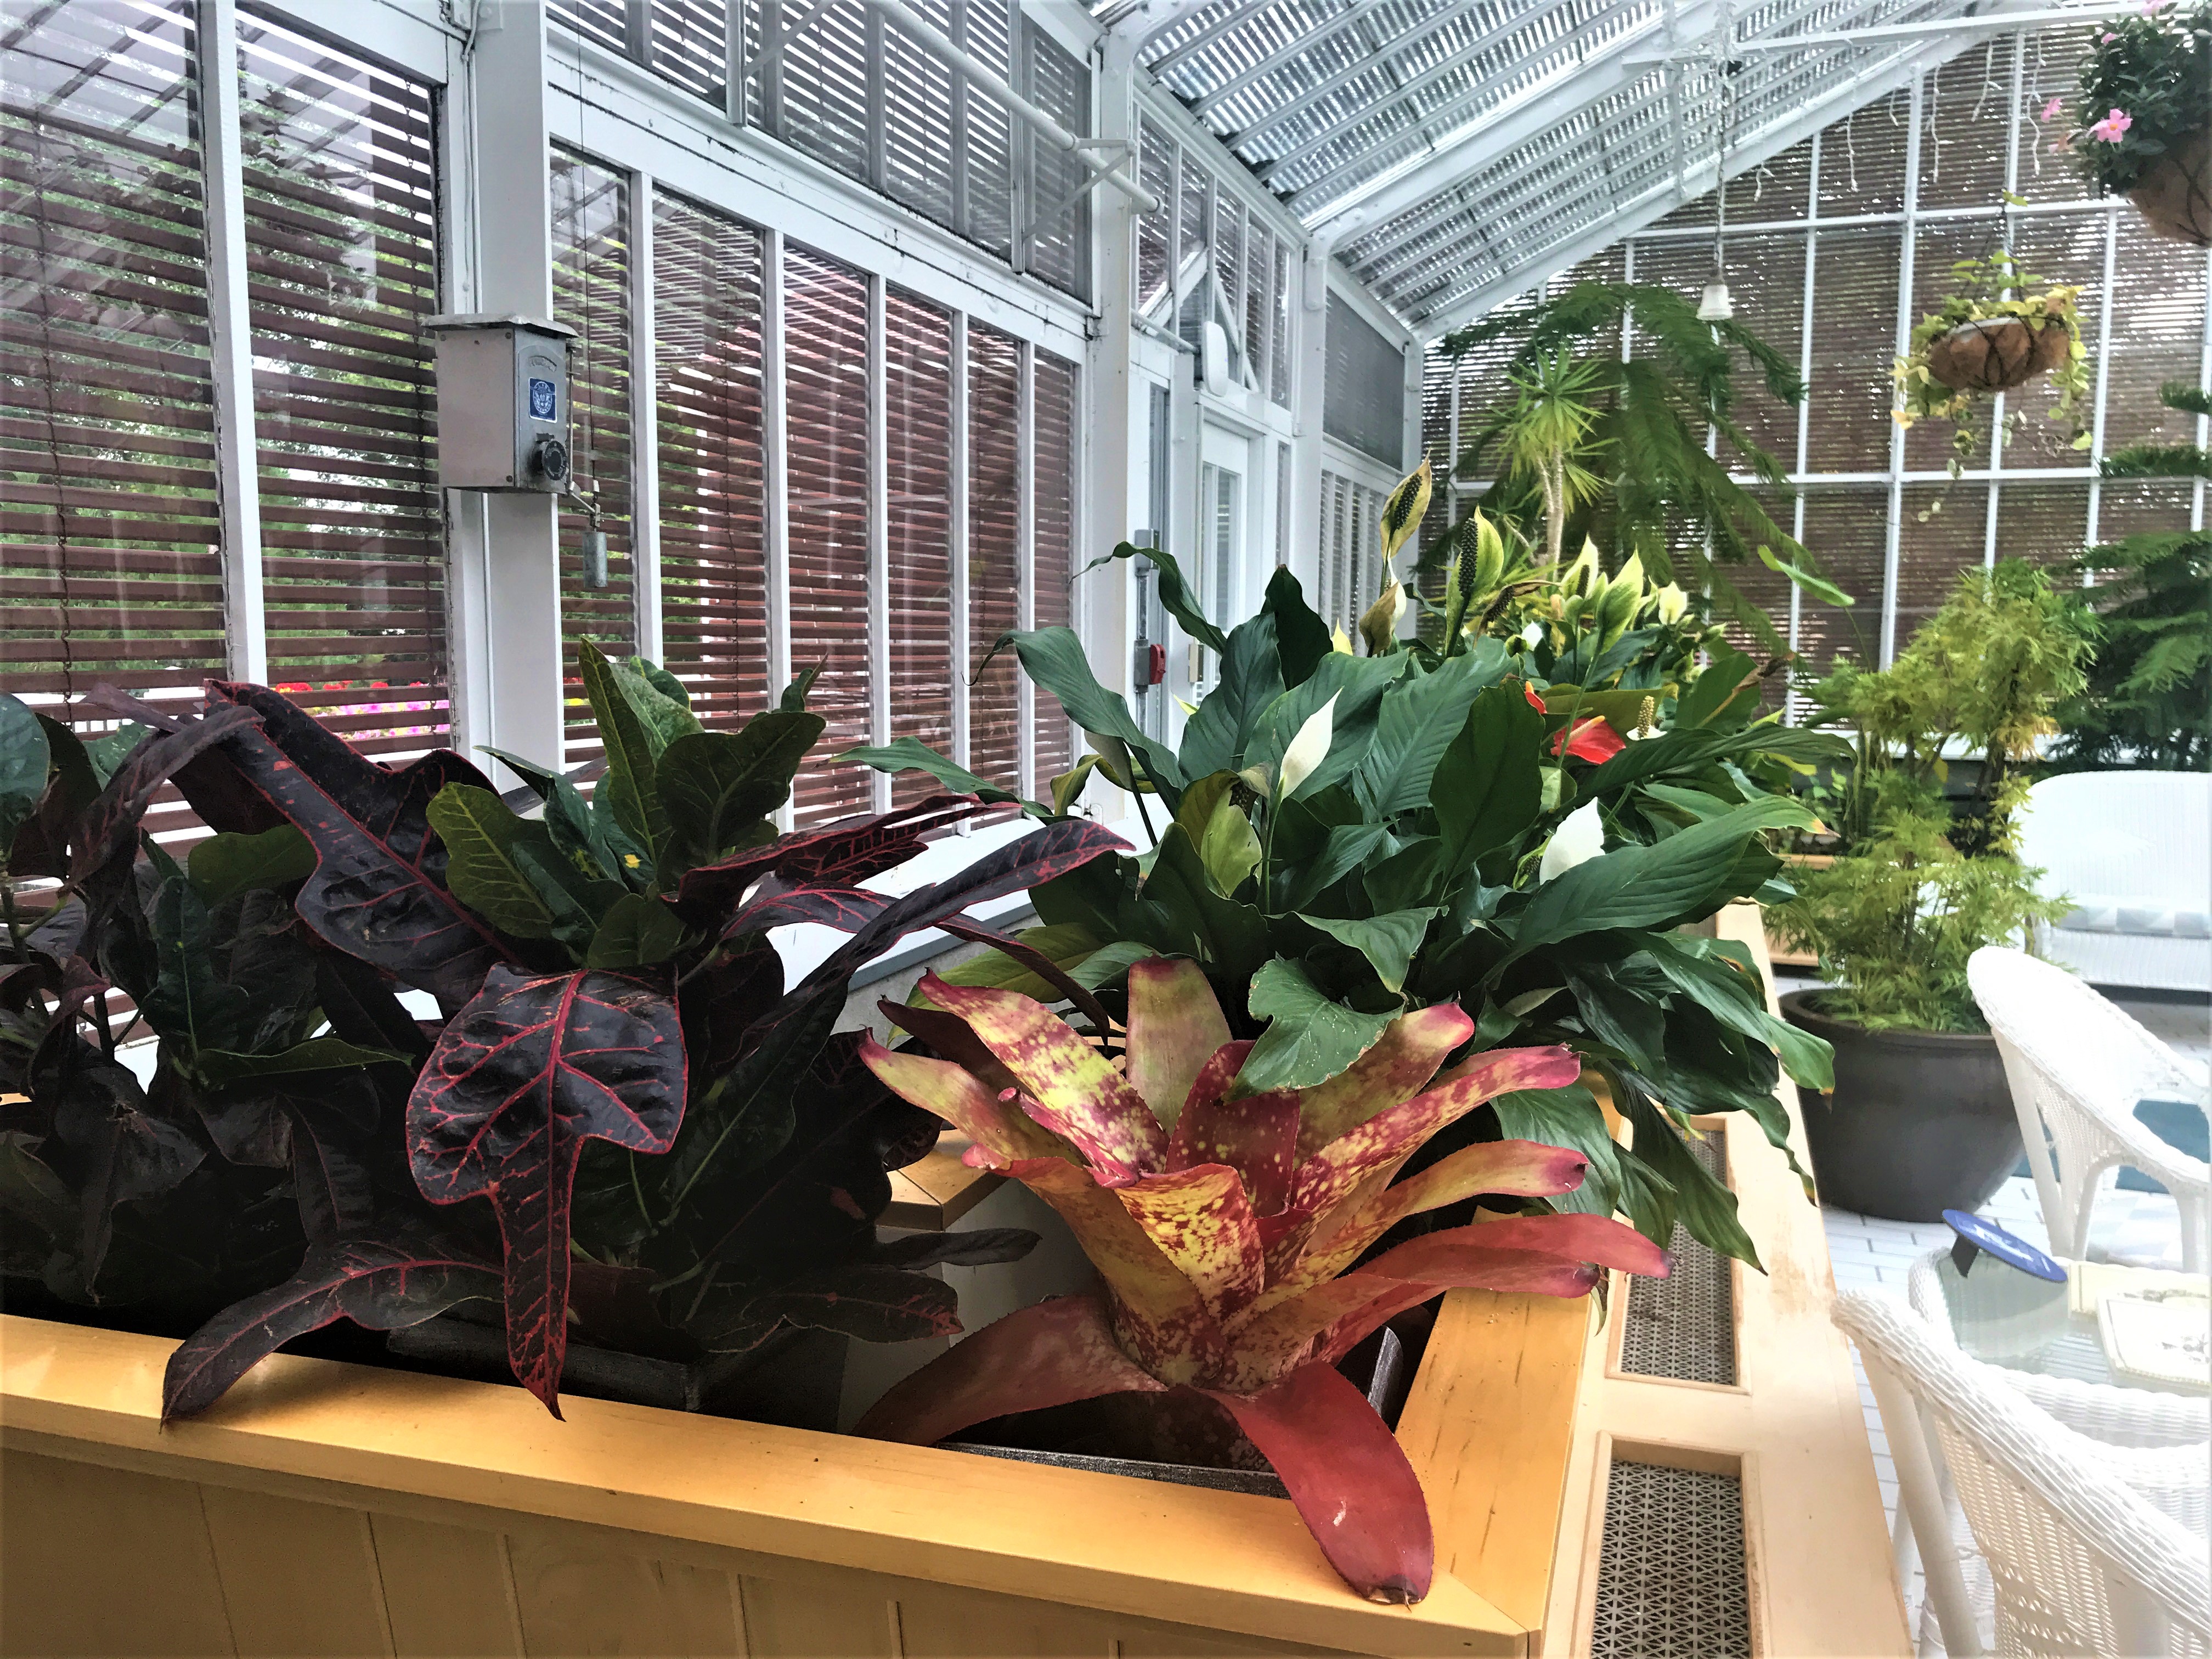 Tropical plants and flowers in the conservatory of Government House SK